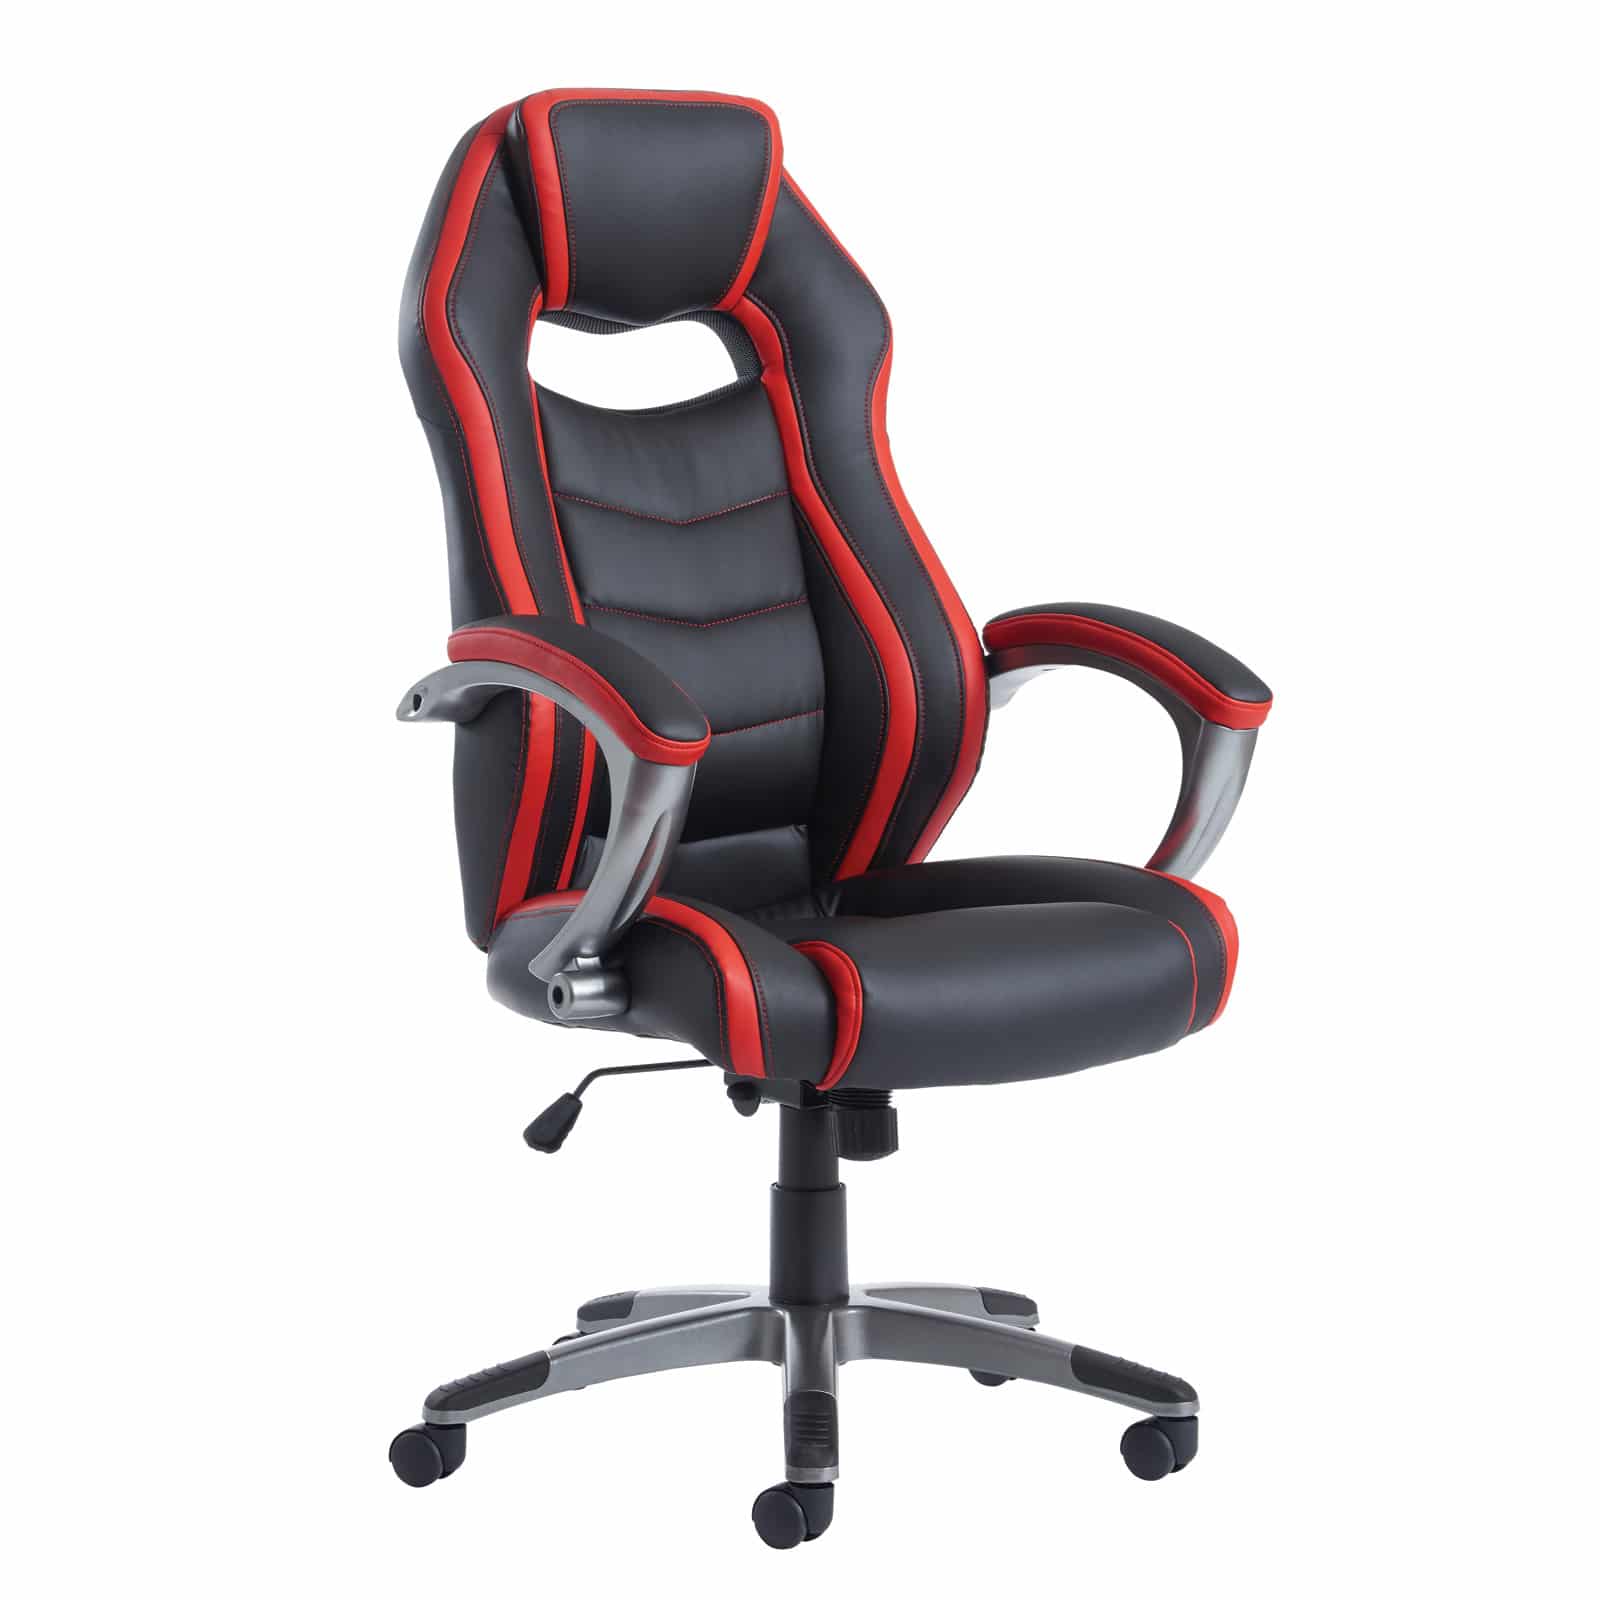 Office Elephant OE01-JEN300T1 Jensen high back executive chair black and red